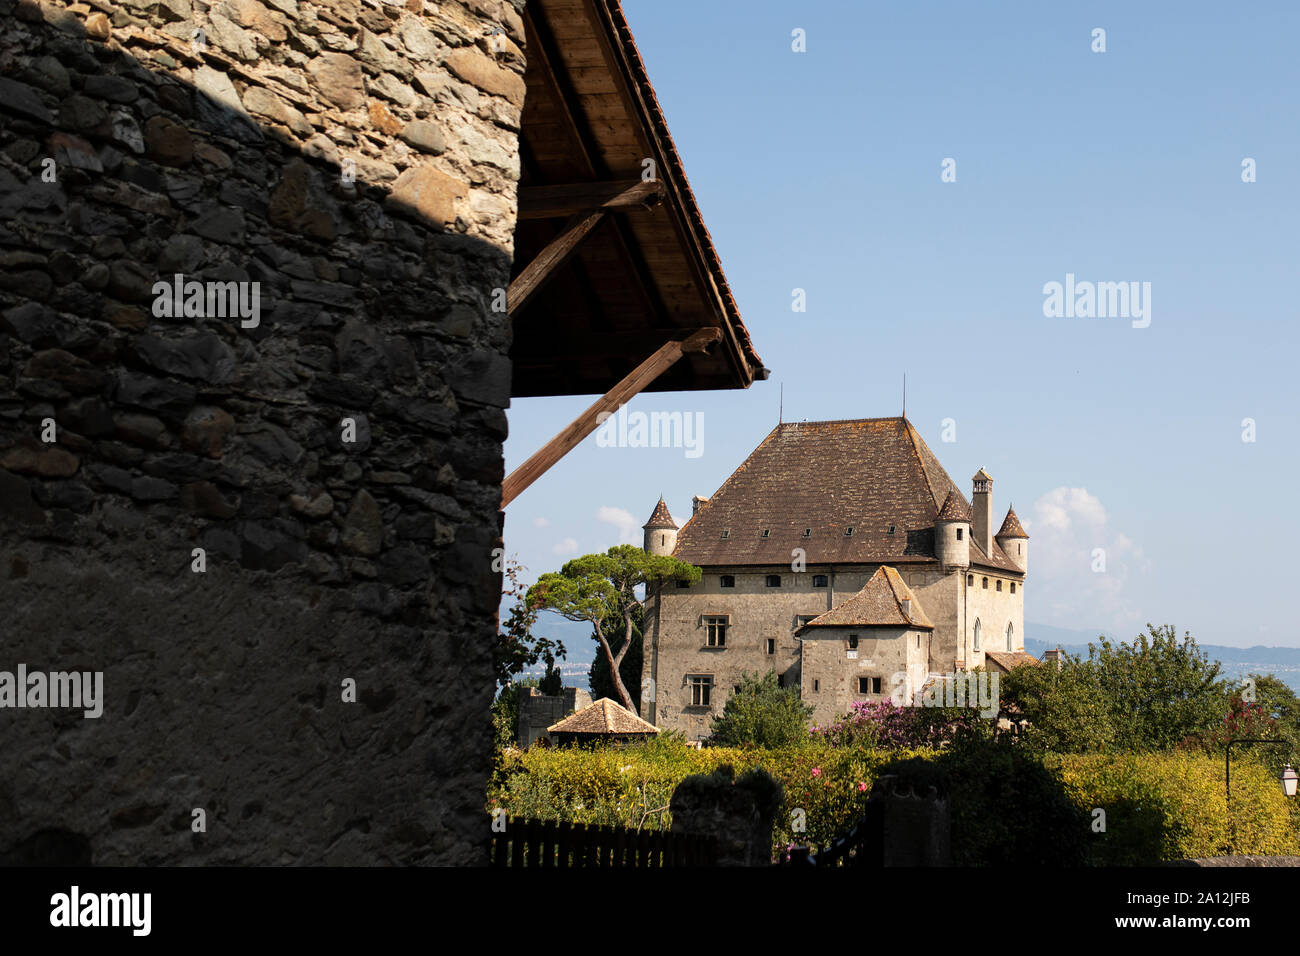 The Garden of the Five Senses and the chateau in the medieval town of Yvoire, Haute-Savoie, Auvergne-Rhône-Alpes, France. Stock Photo